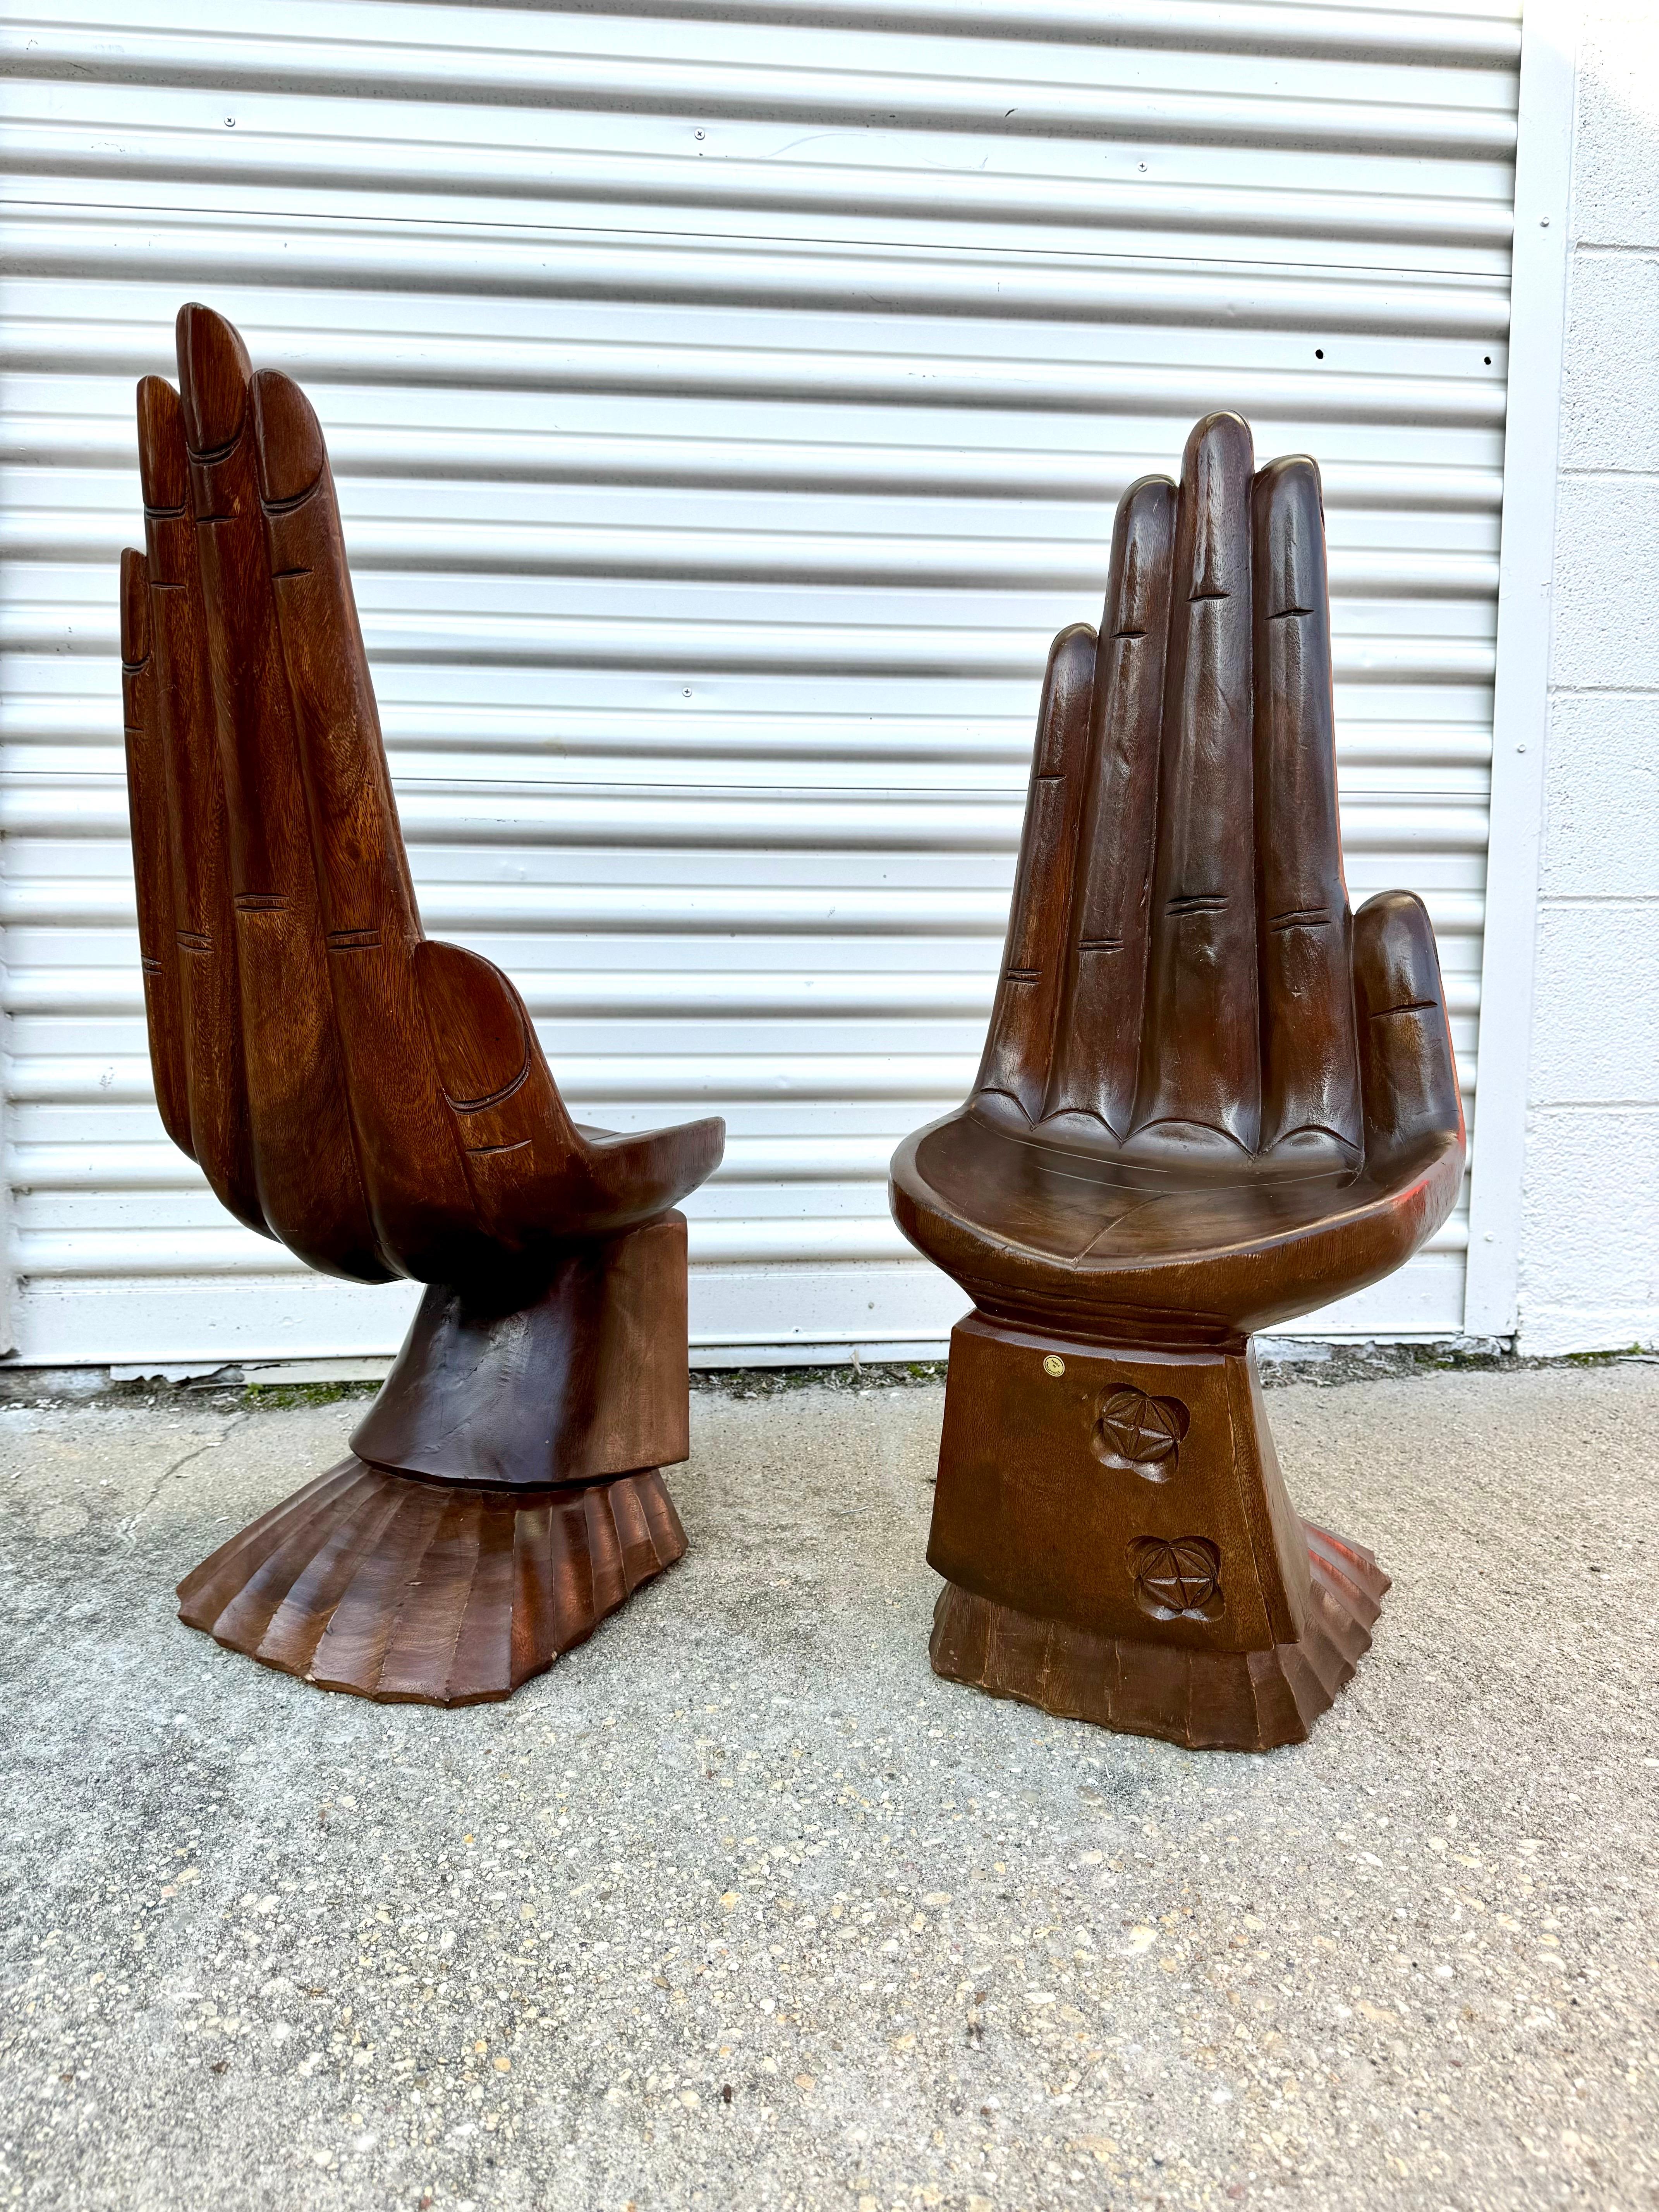 These hand-carved stools/chairs are more than just seating; they are a form of functional art. The craftsmanship required to sculpt the complex shapes of the human hand into furniture speaks to a deep understanding of both form and function by the